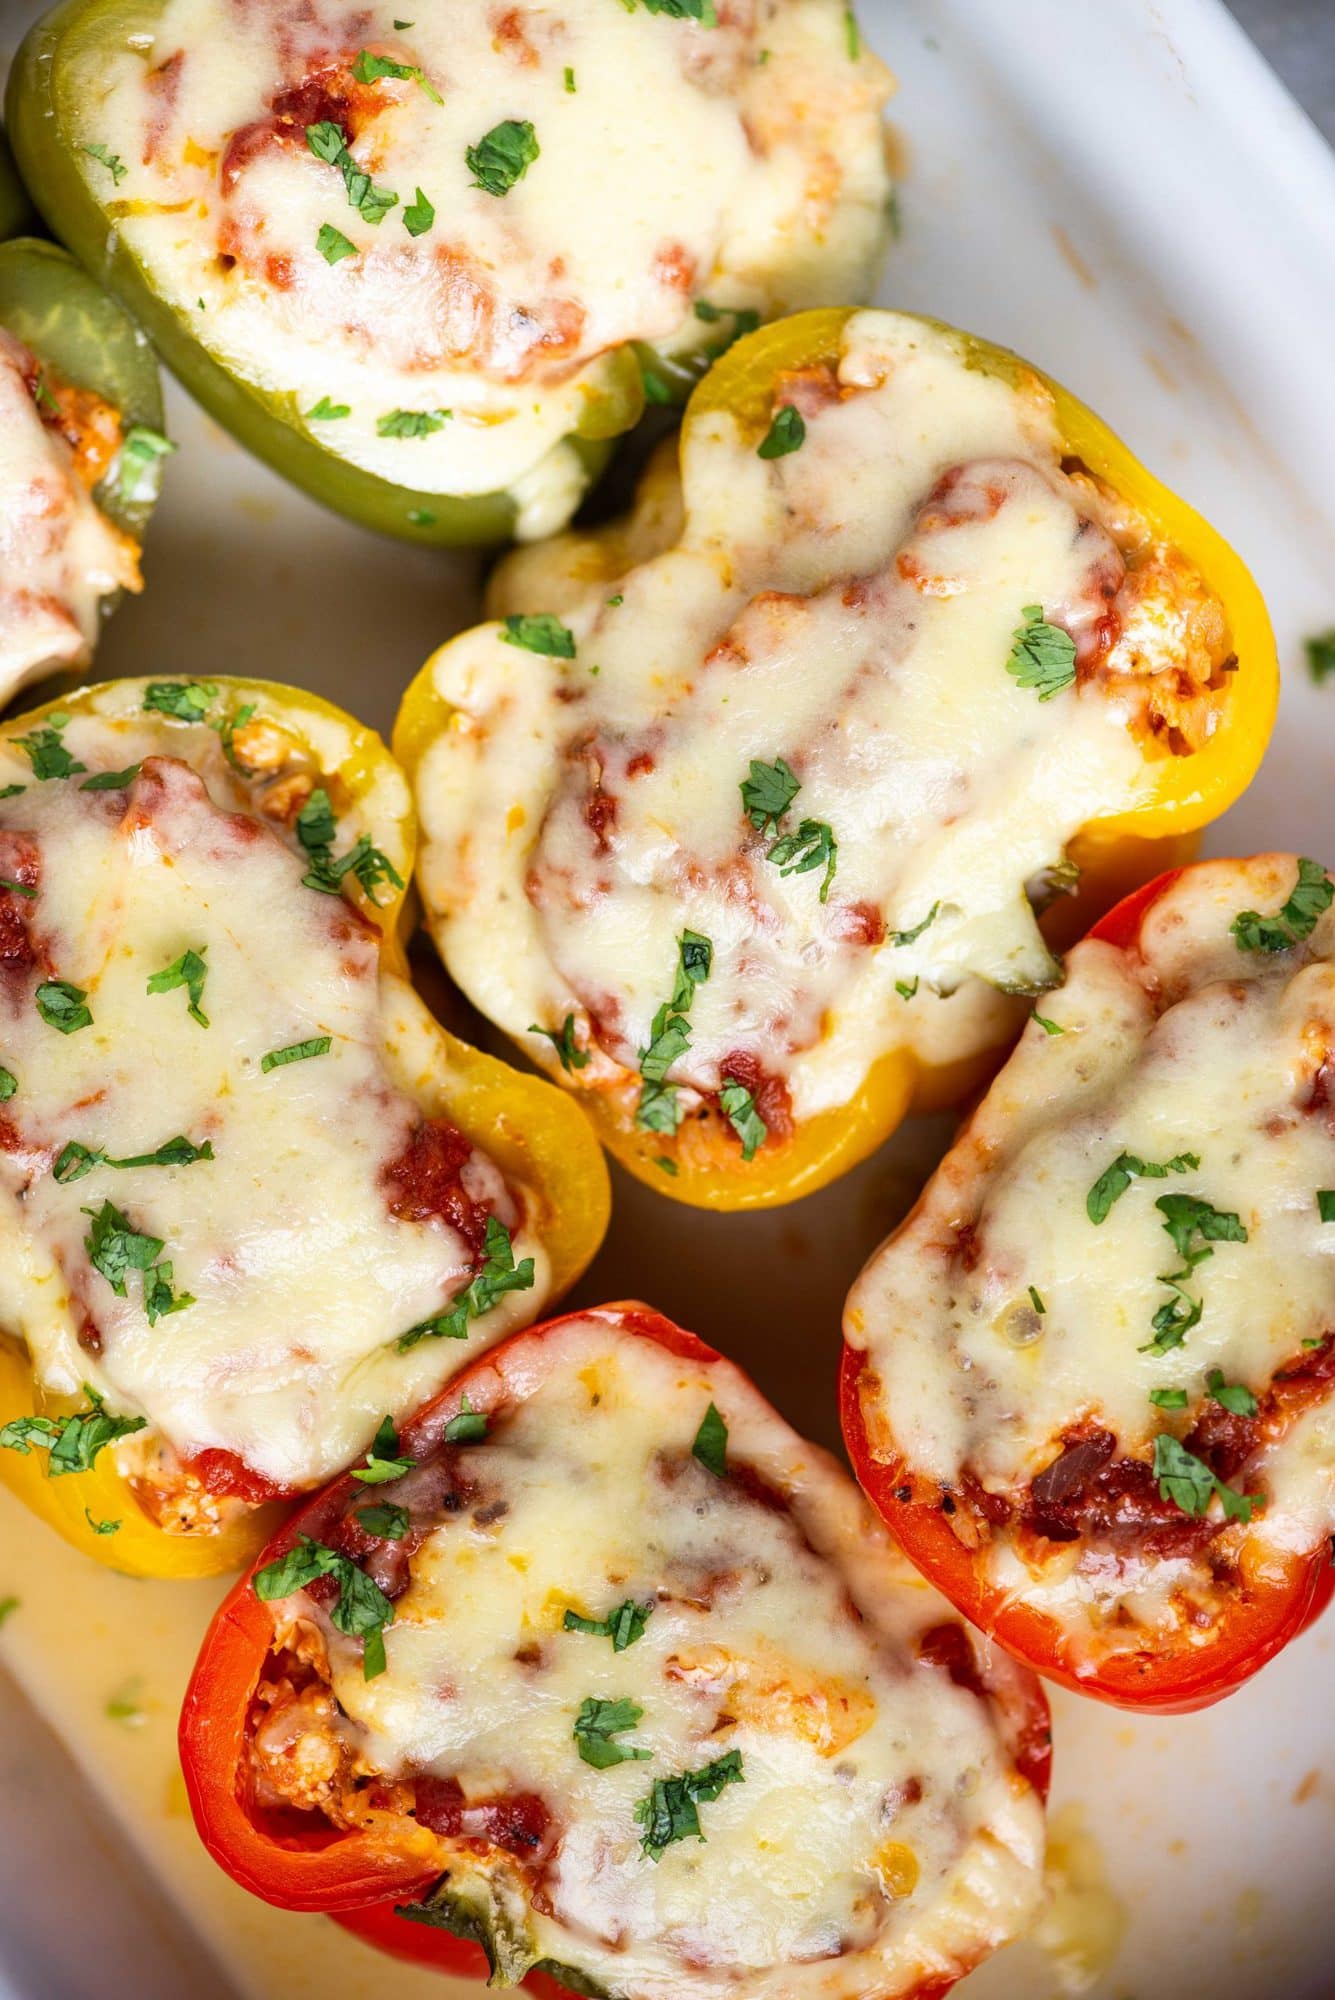 Italian stuffed peppers filled with Chicken, Rice and lots of cheese is a complete meal in itself. The stuffing is moist, tangy and full of Italian flavours